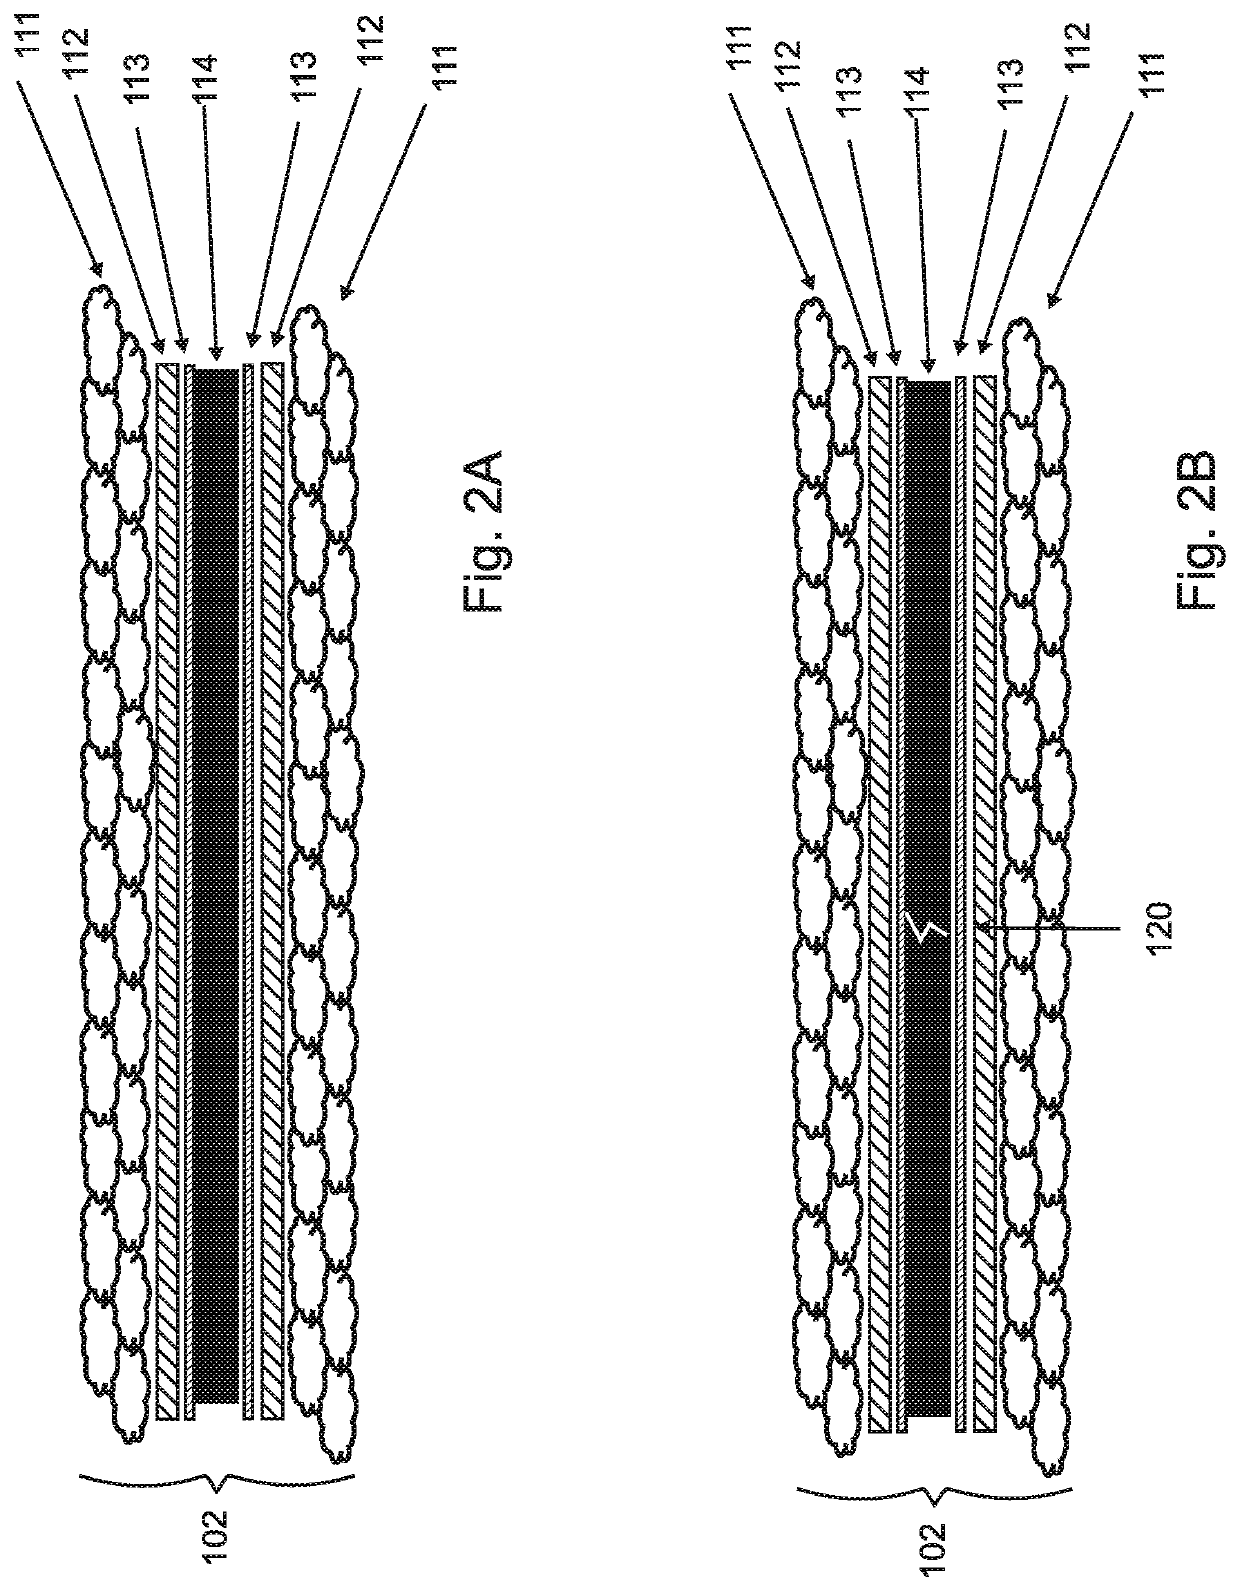 Flexible and foldable electromagnetic shielding